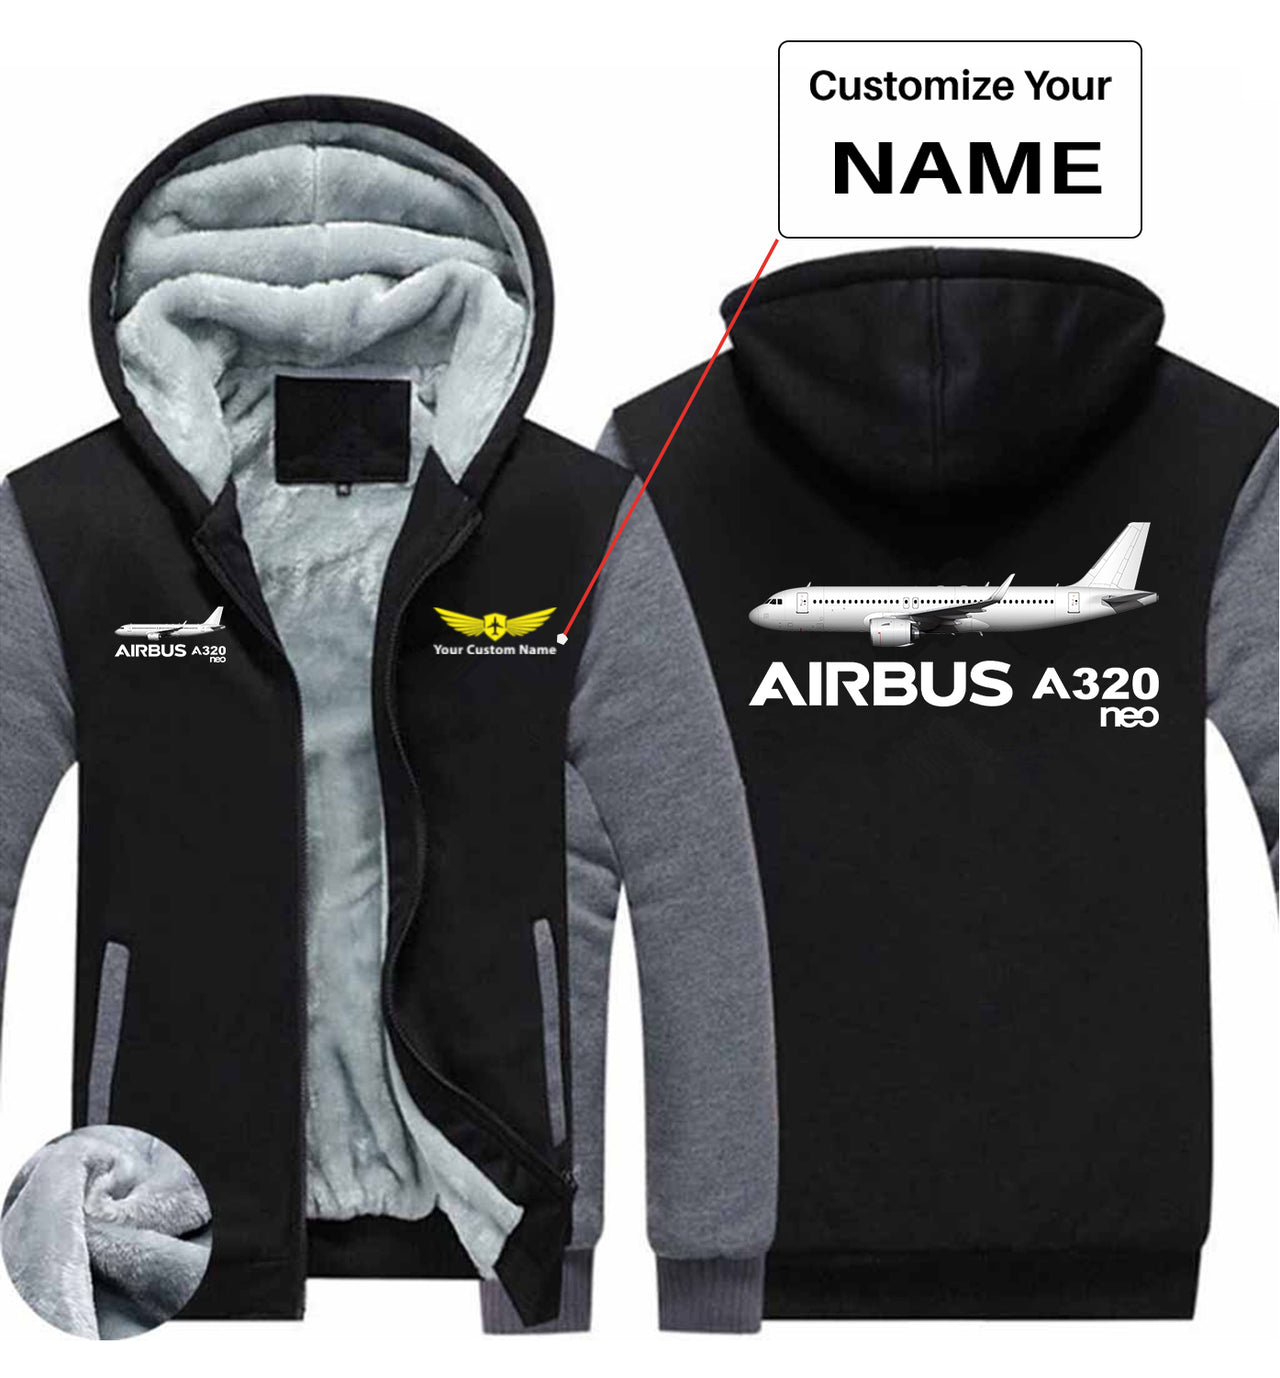 The Airbus A320Neo Designed Zipped Sweatshirts